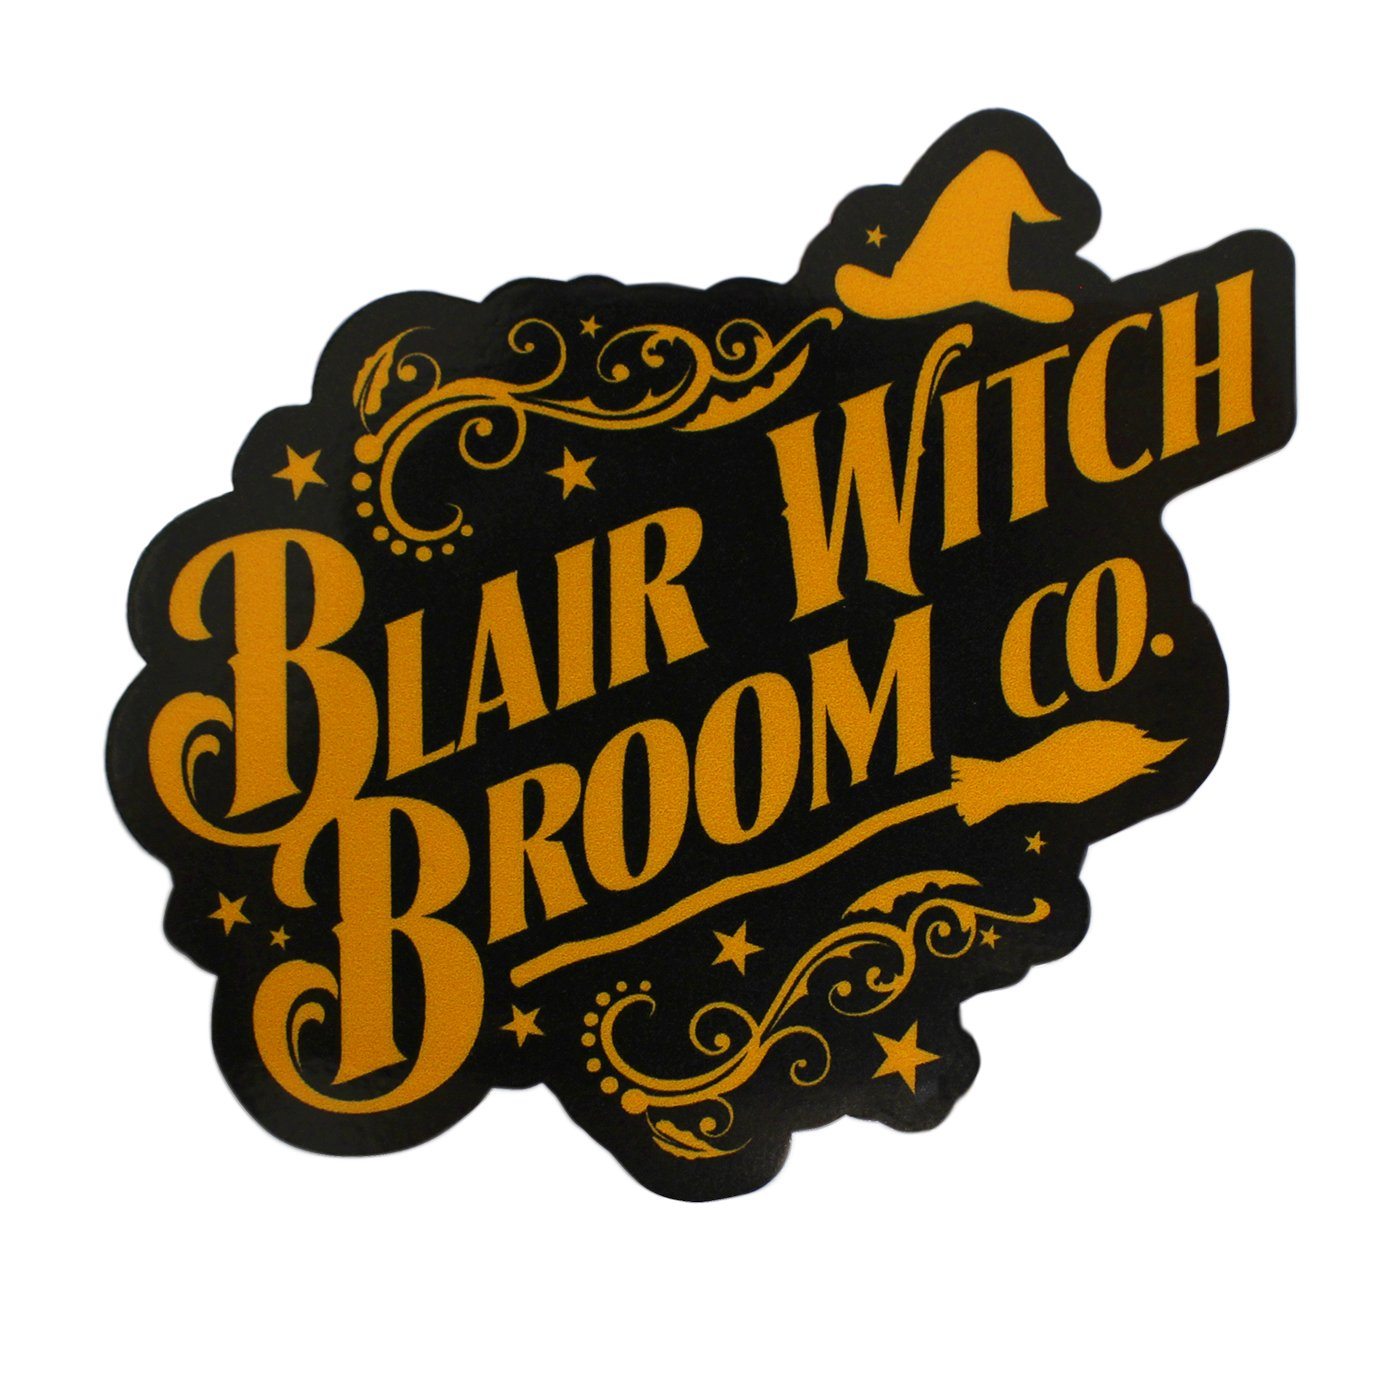 Blair Witch Broom Company (Orange on Black) / Sticker - Route One Apparel